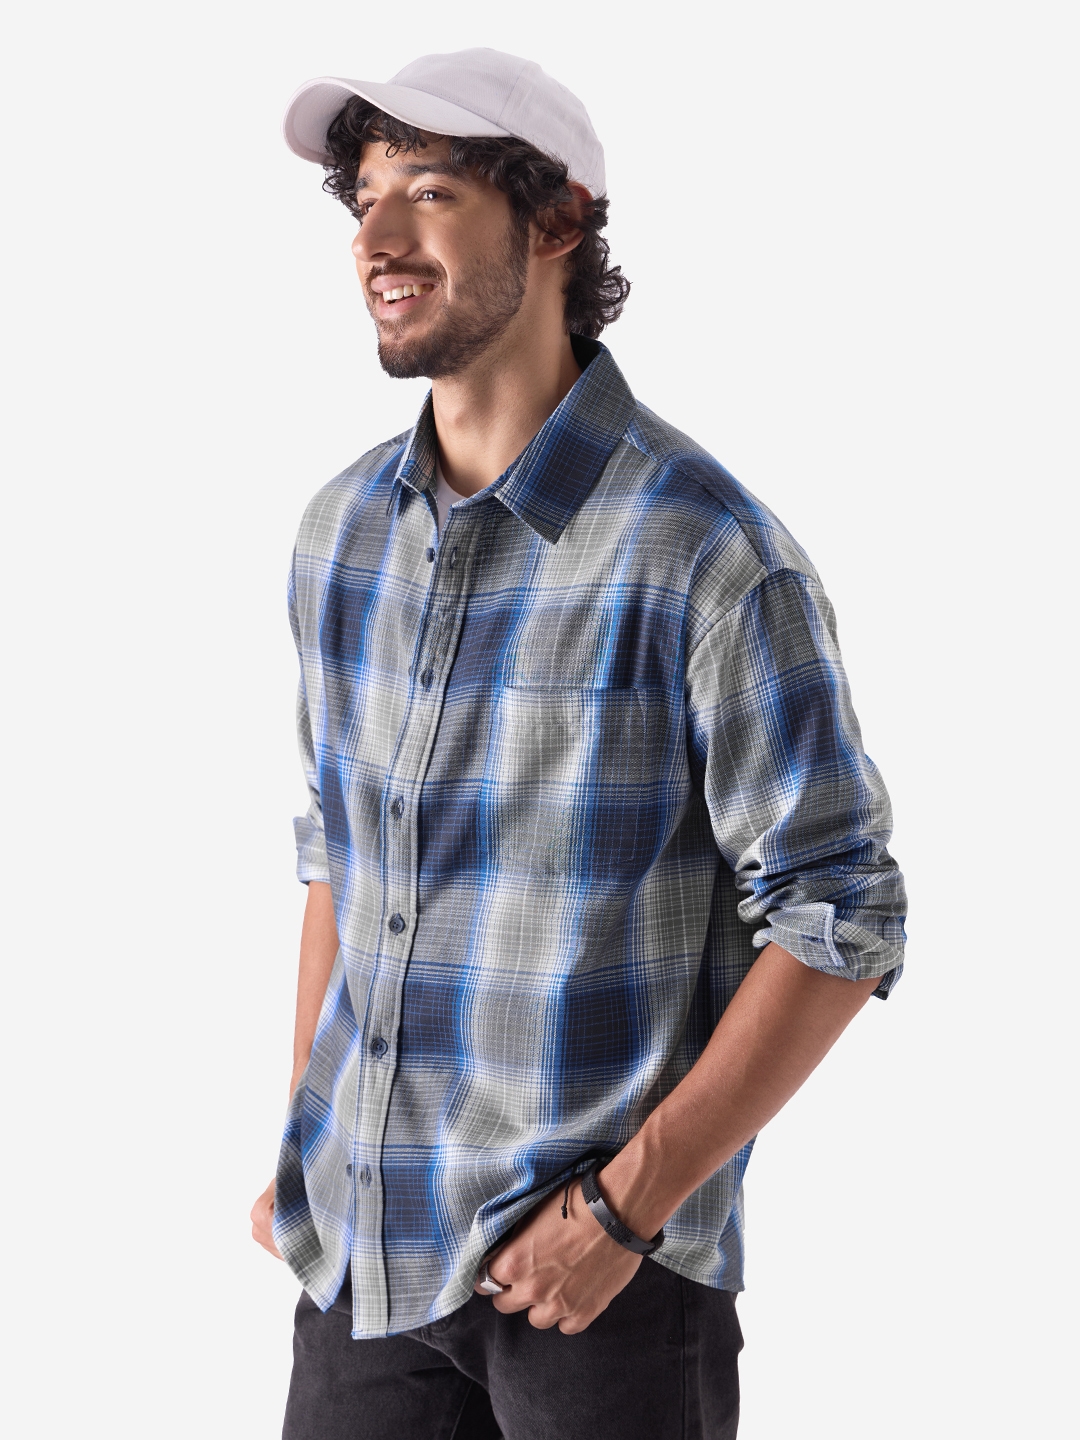 The Souled Store | Men's Plaid: Blue & White Men's Relaxed Shirts